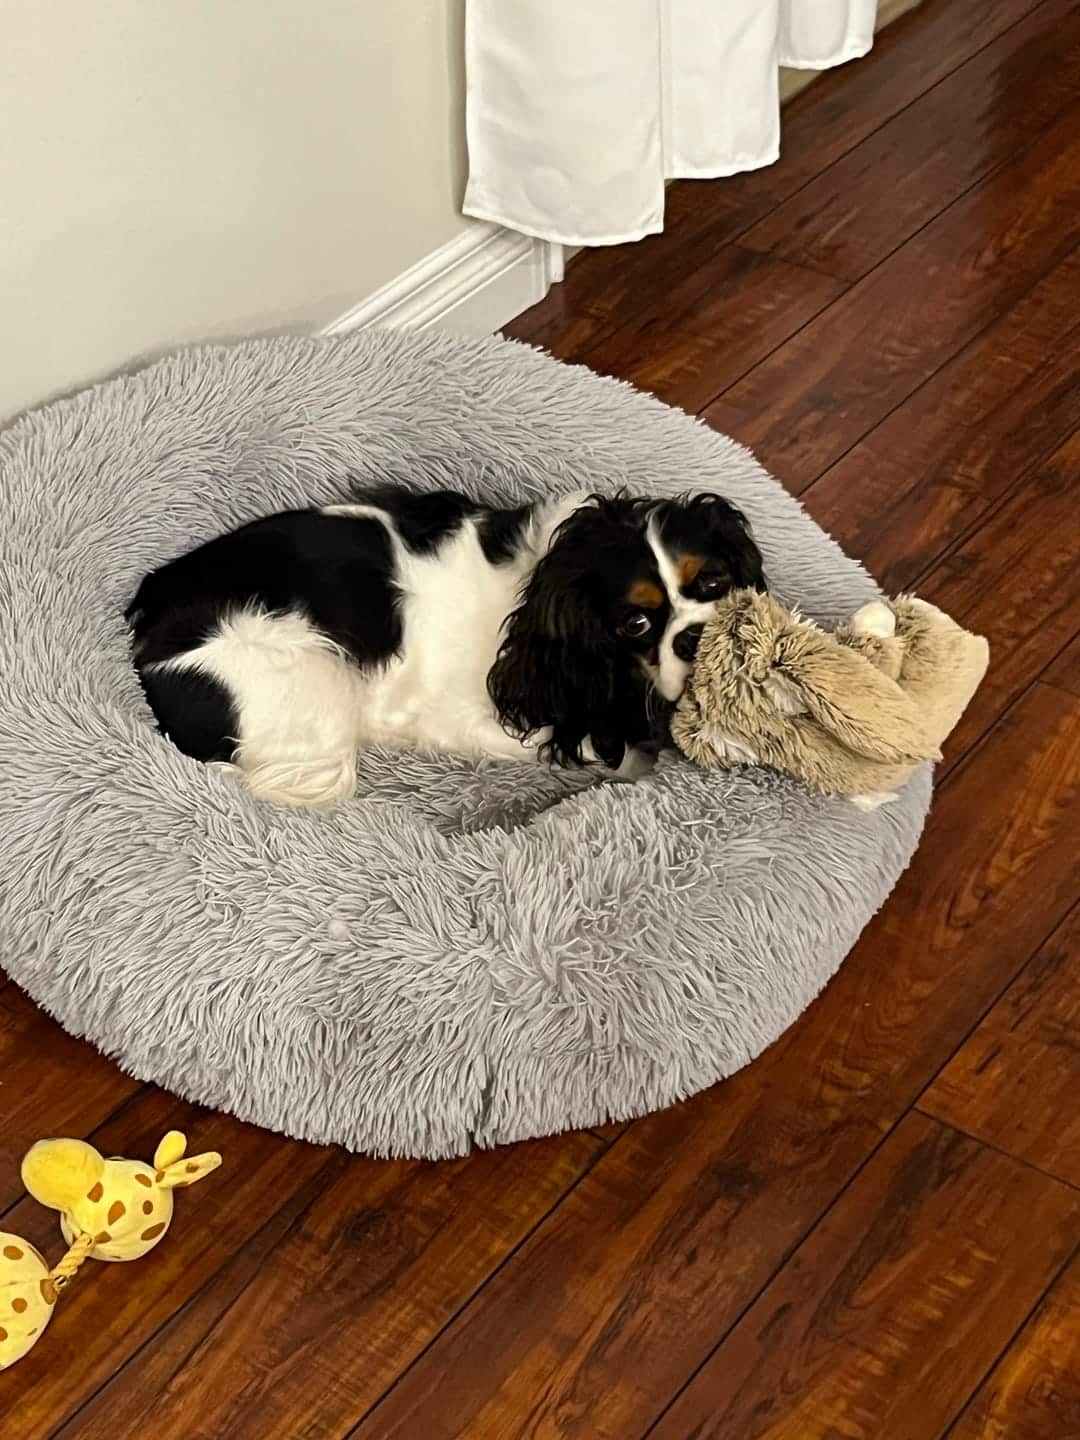 I bought Brooklyn Dog Bed